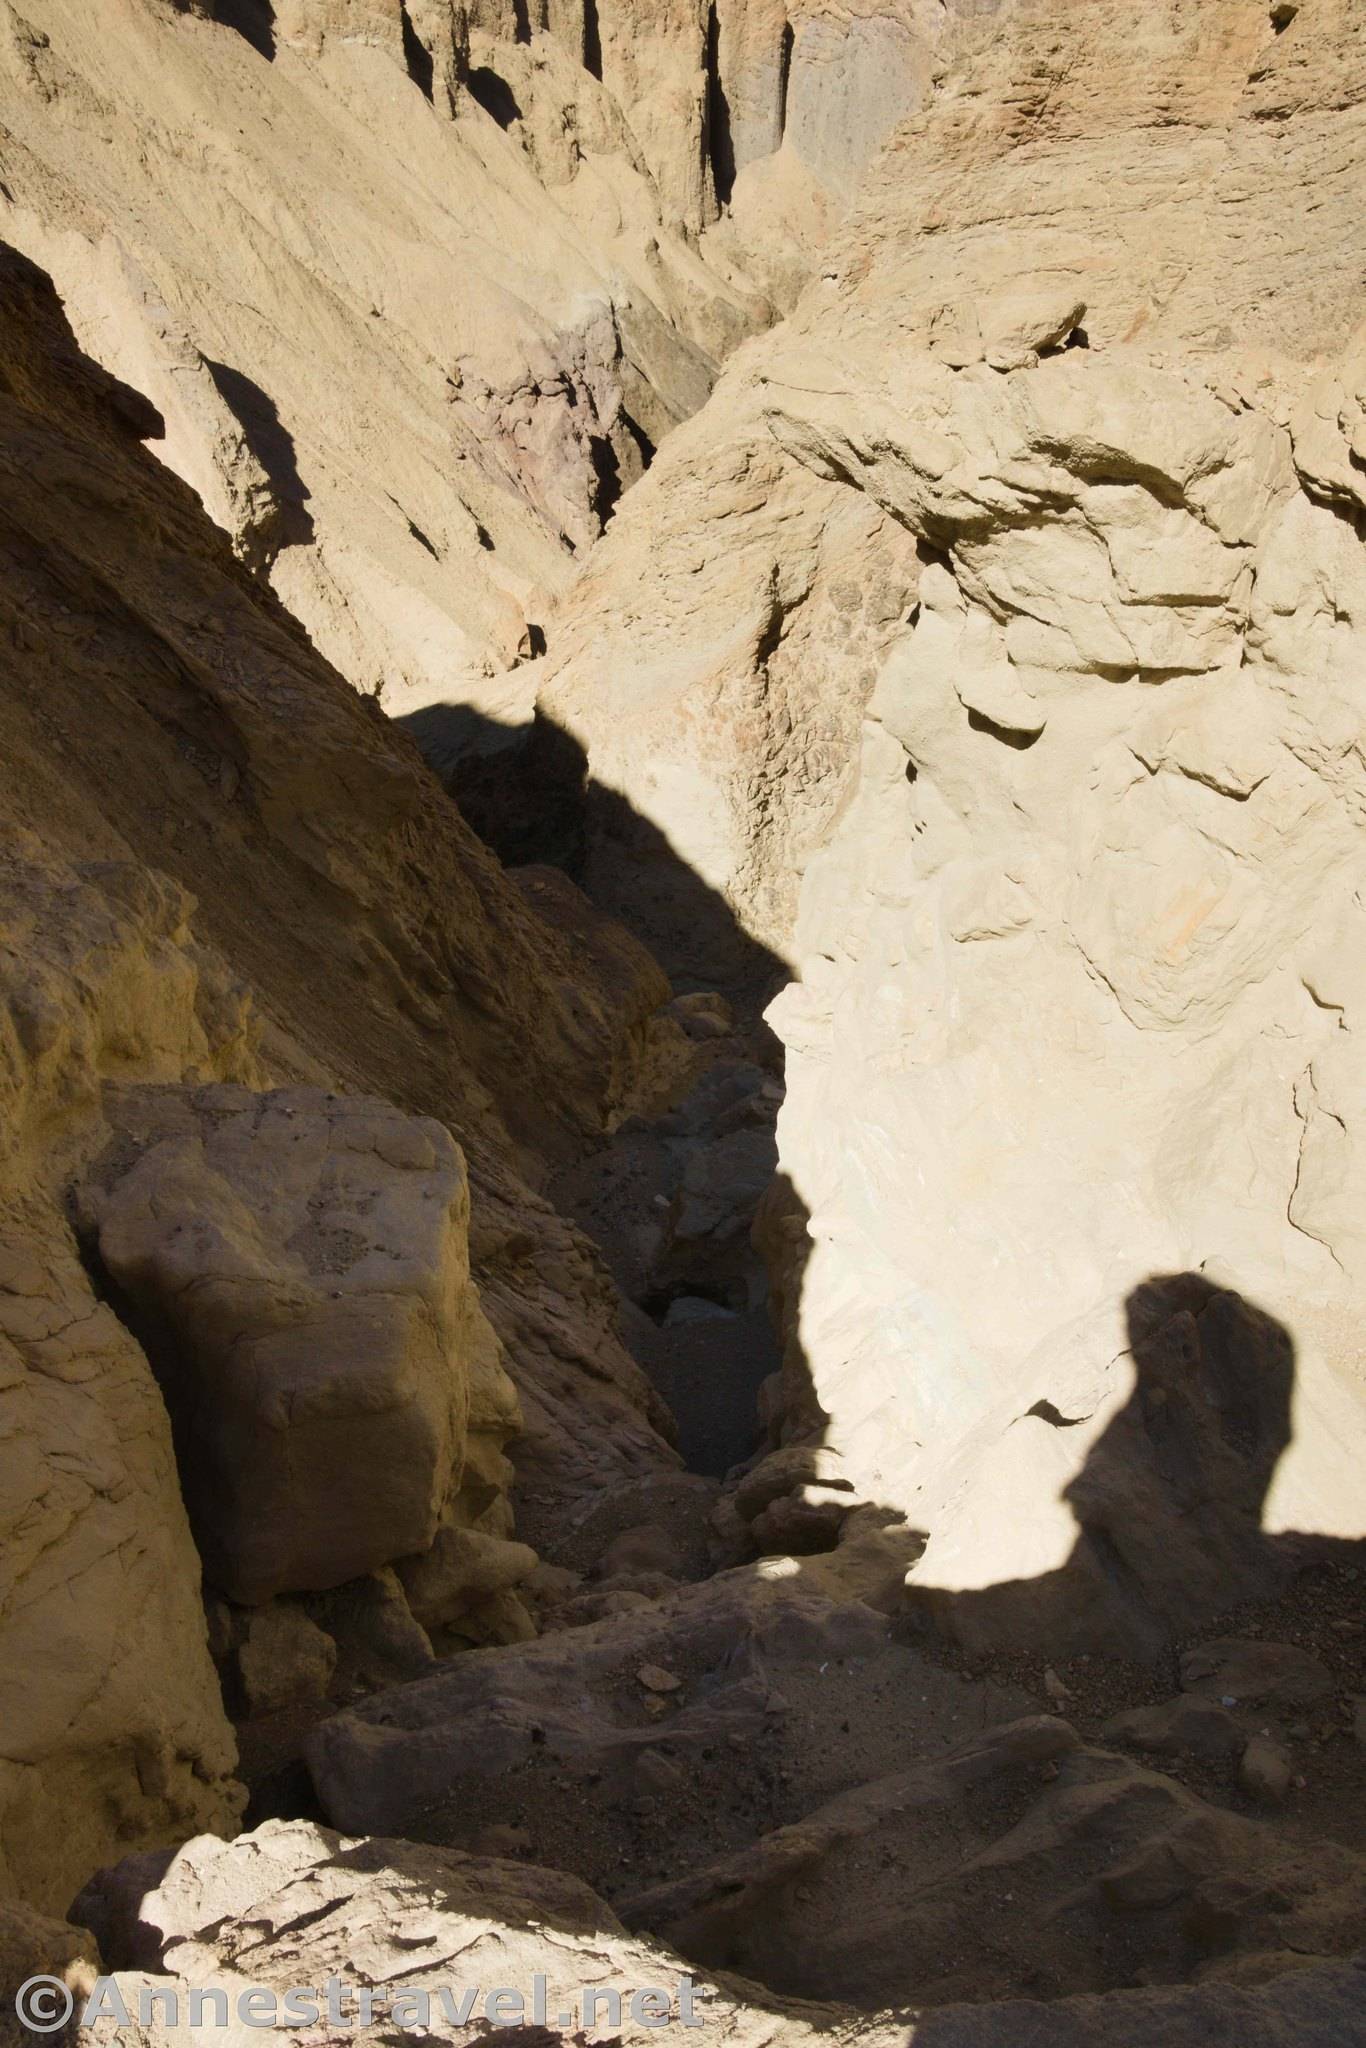 At the top of the sketchy dryfall in 20 Mule Team Canyon, Death Valley National Park, California